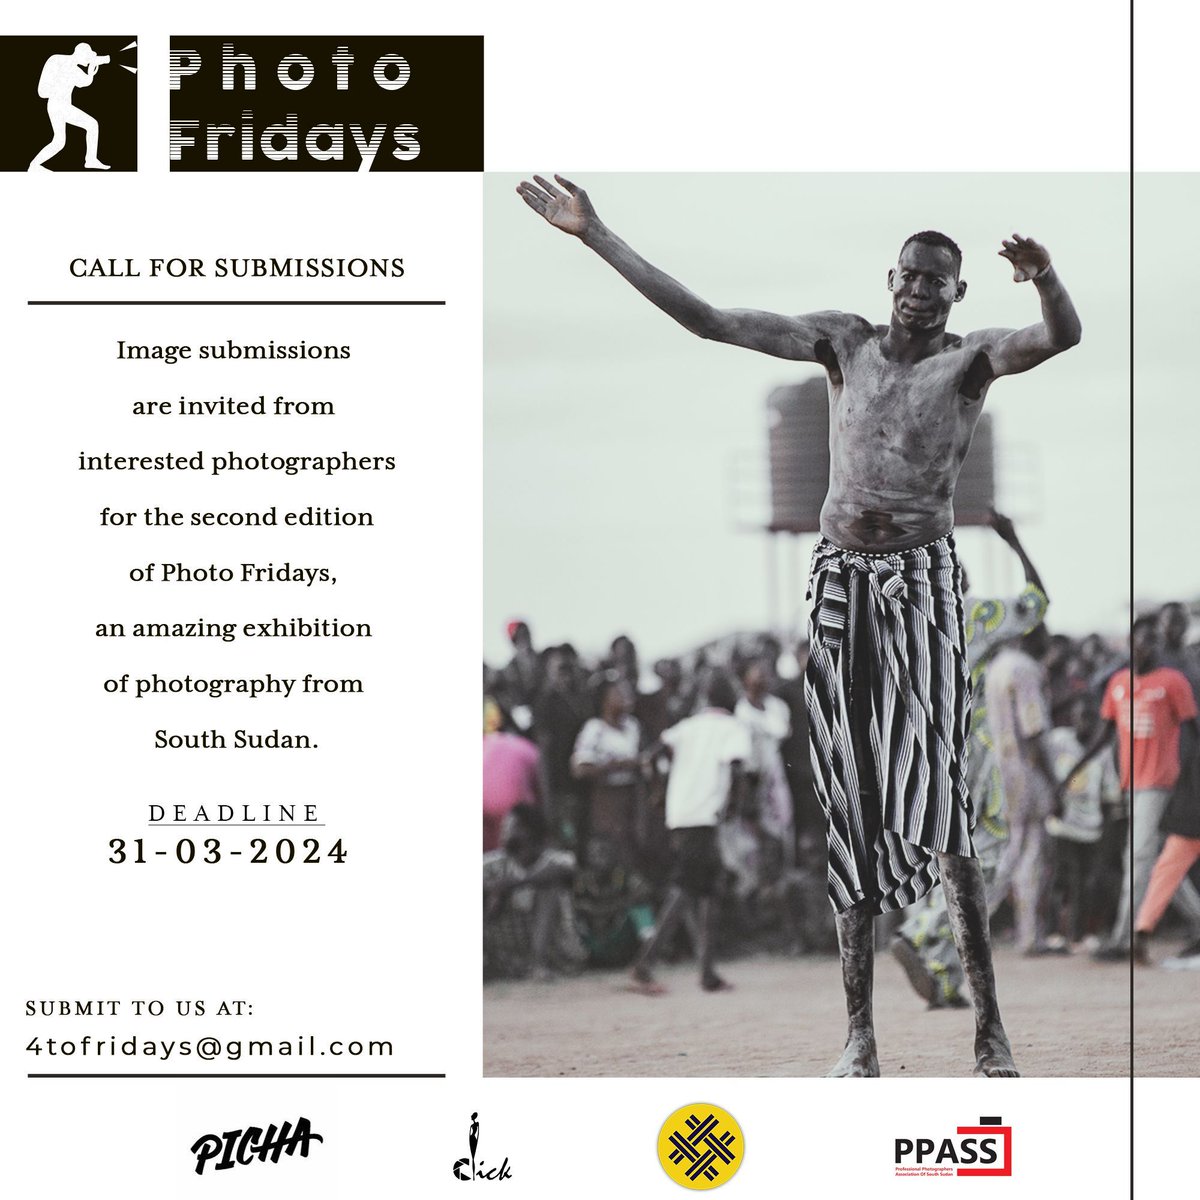 Calling All Photographers Submit at least 10 images to to us at 4tofridays@gmail.com.for the chance to be part of an amazing exhibition experience. #photographyexhibition #photofridayssouthsudan #portfolioreview #sceniushub Submission Deadline : 31- 03 - 2024